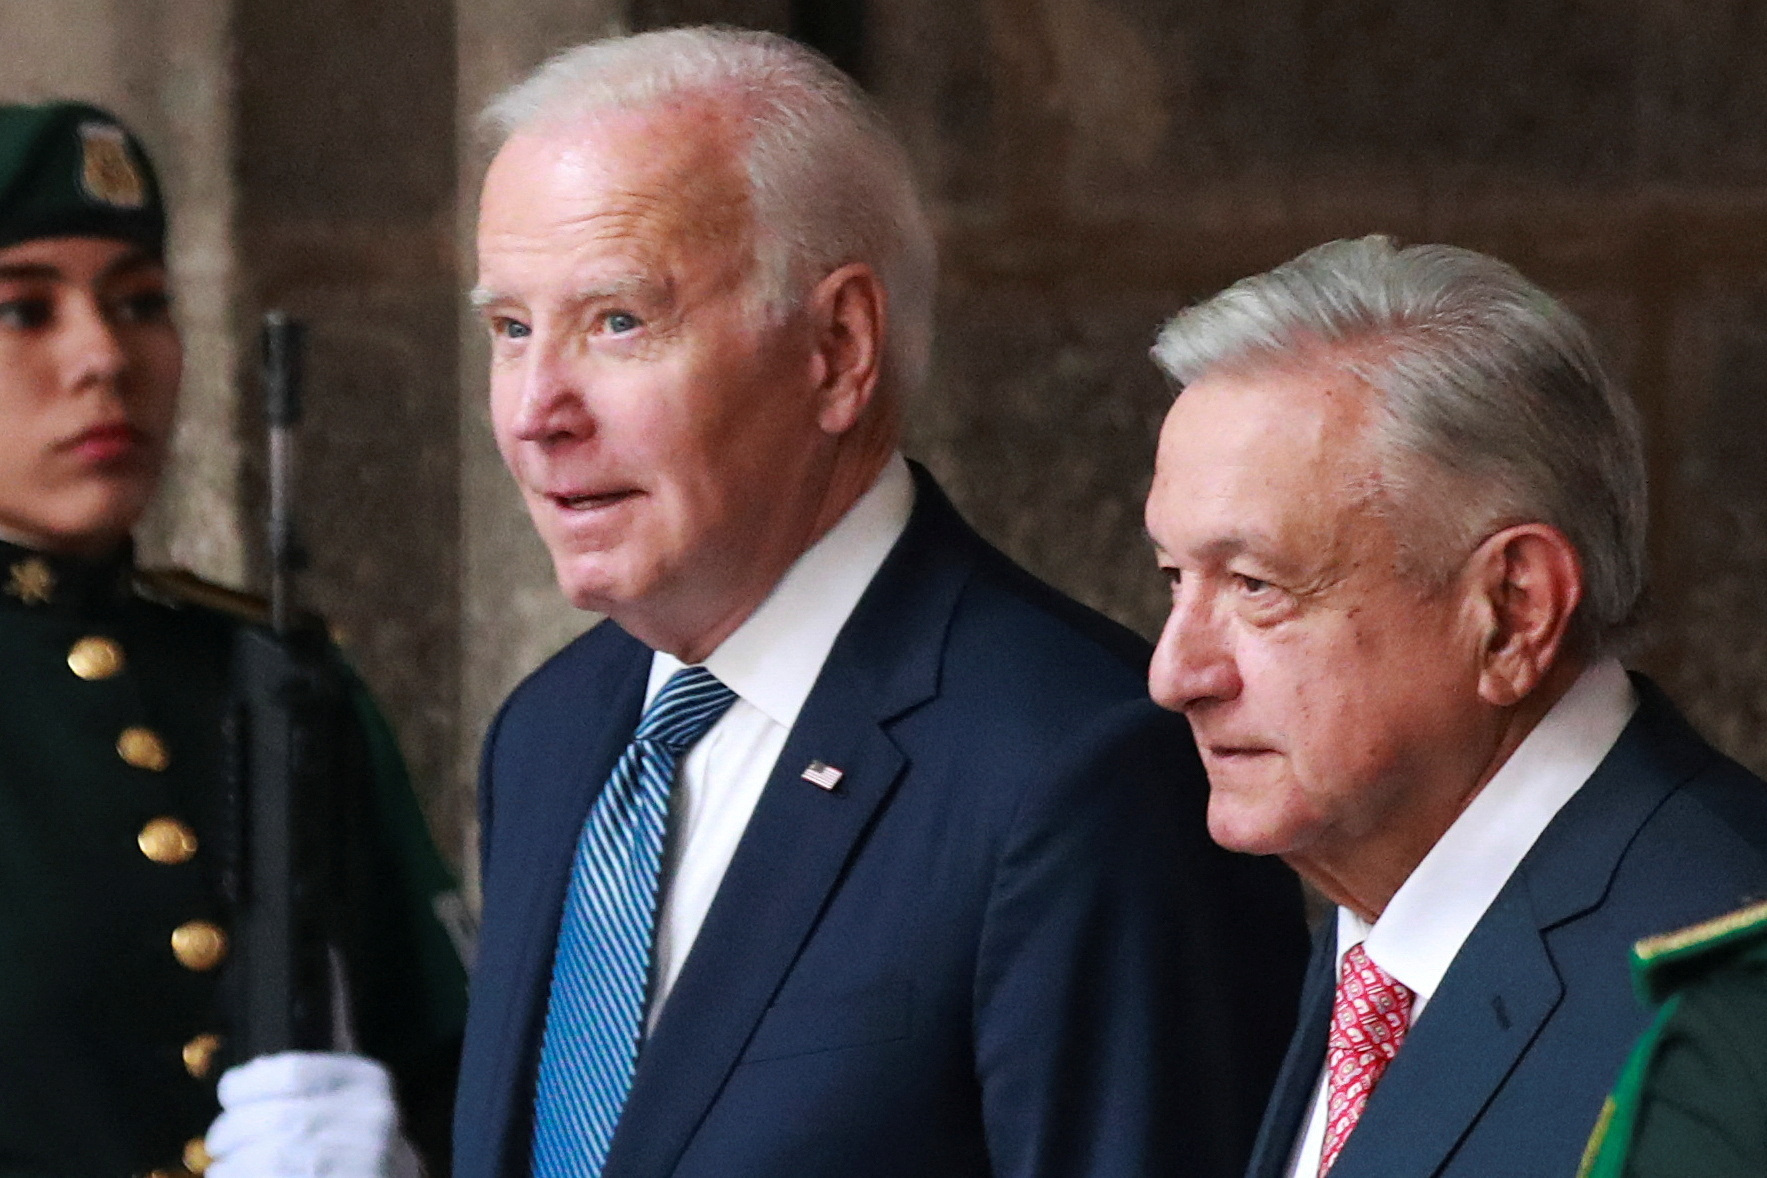 U.S. President Joe Biden meets his Mexican counterpart Andres Manuel Lopez Obrador at an official welcoming ceremony before taking part in the North American Leaders' Summit at the National Palace in Mexico City, Mexico January 9, 2023. REUTERS/Henry Romero